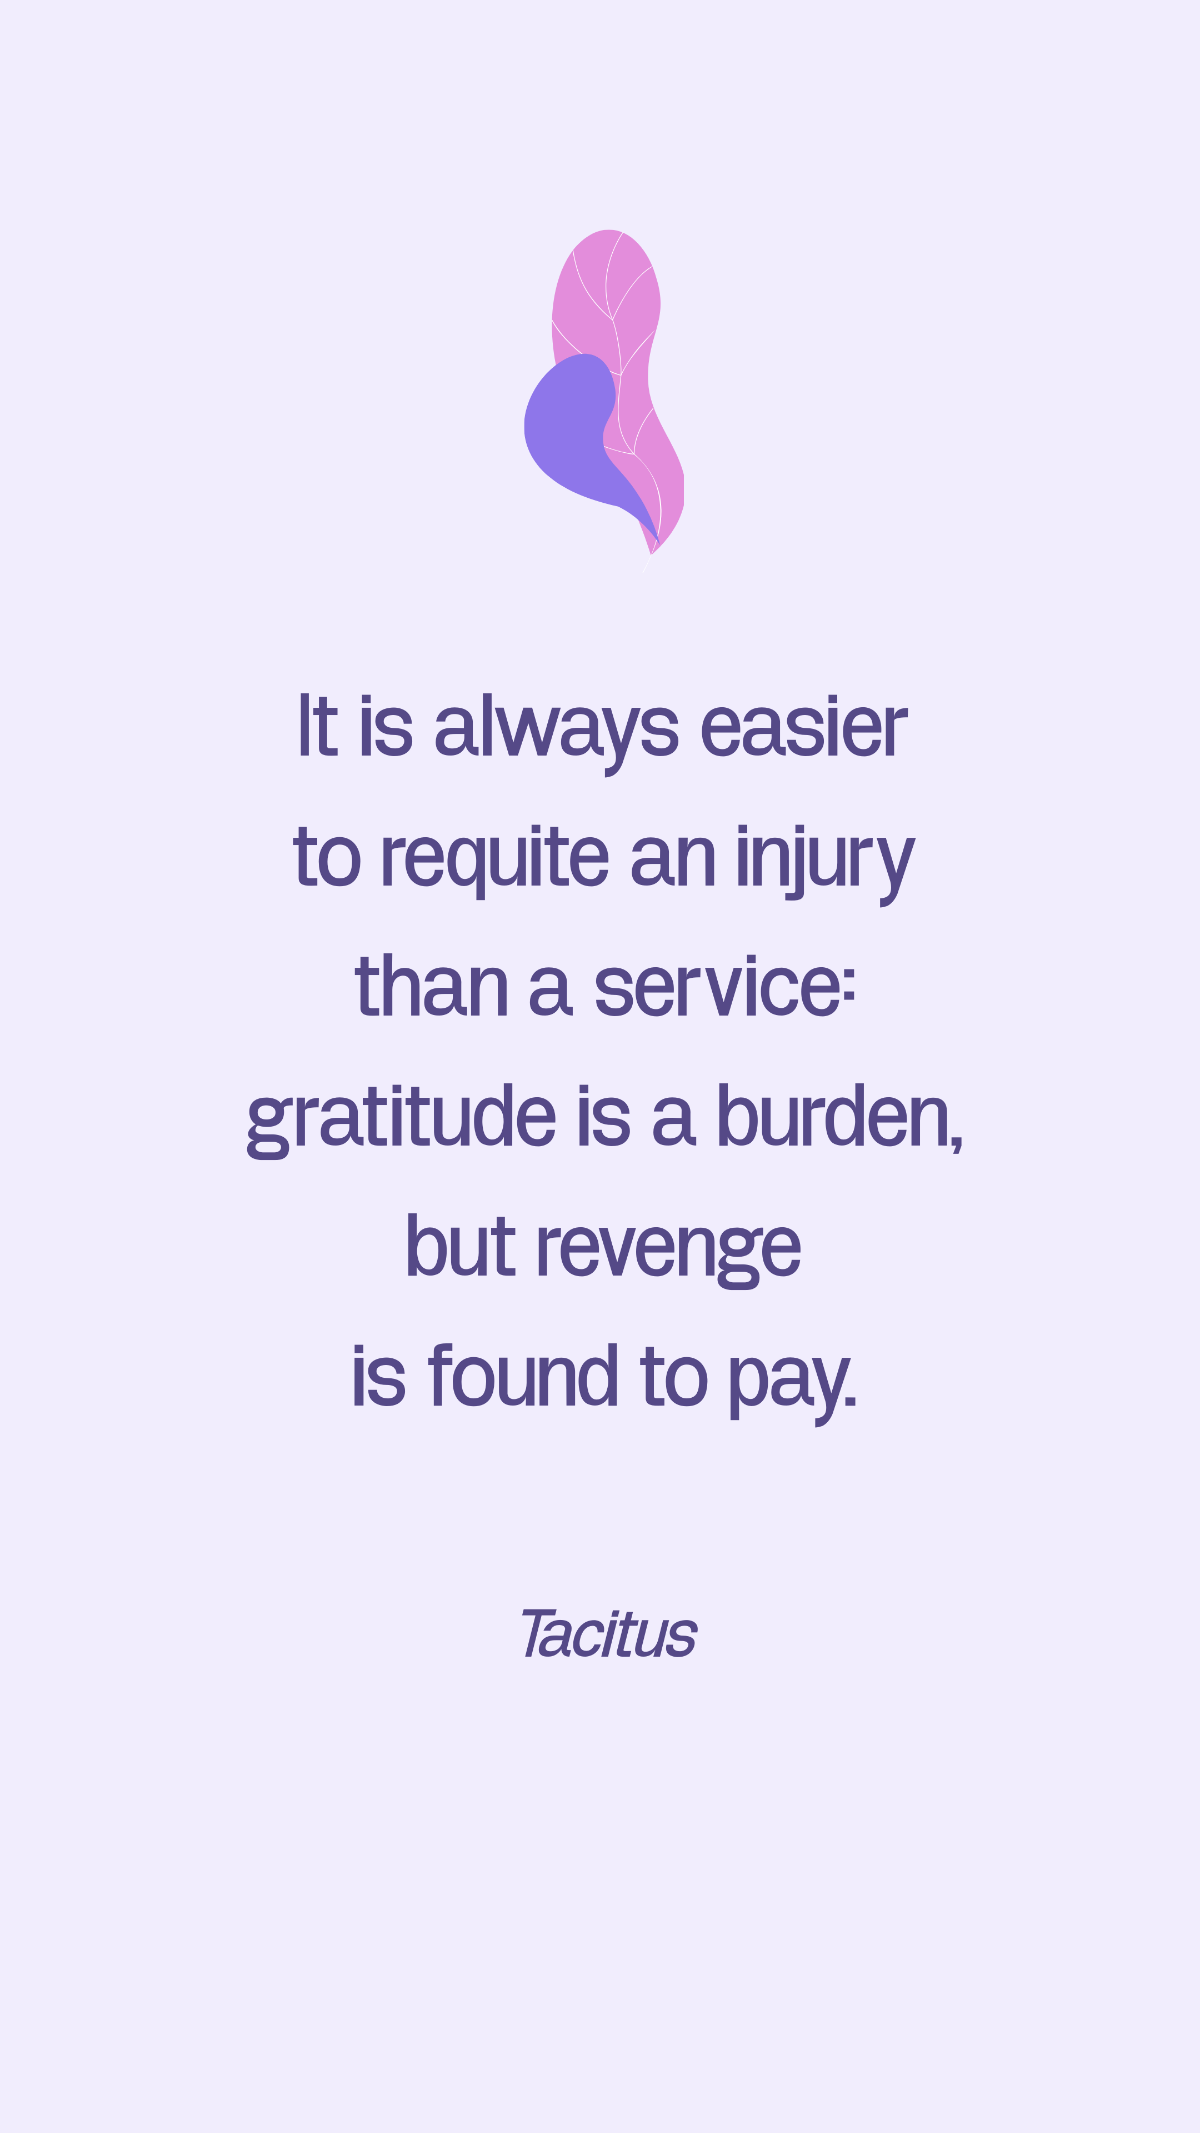 Tacitus - It is always easier to requite an injury than a service: gratitude is a burden, but revenge is found to pay.